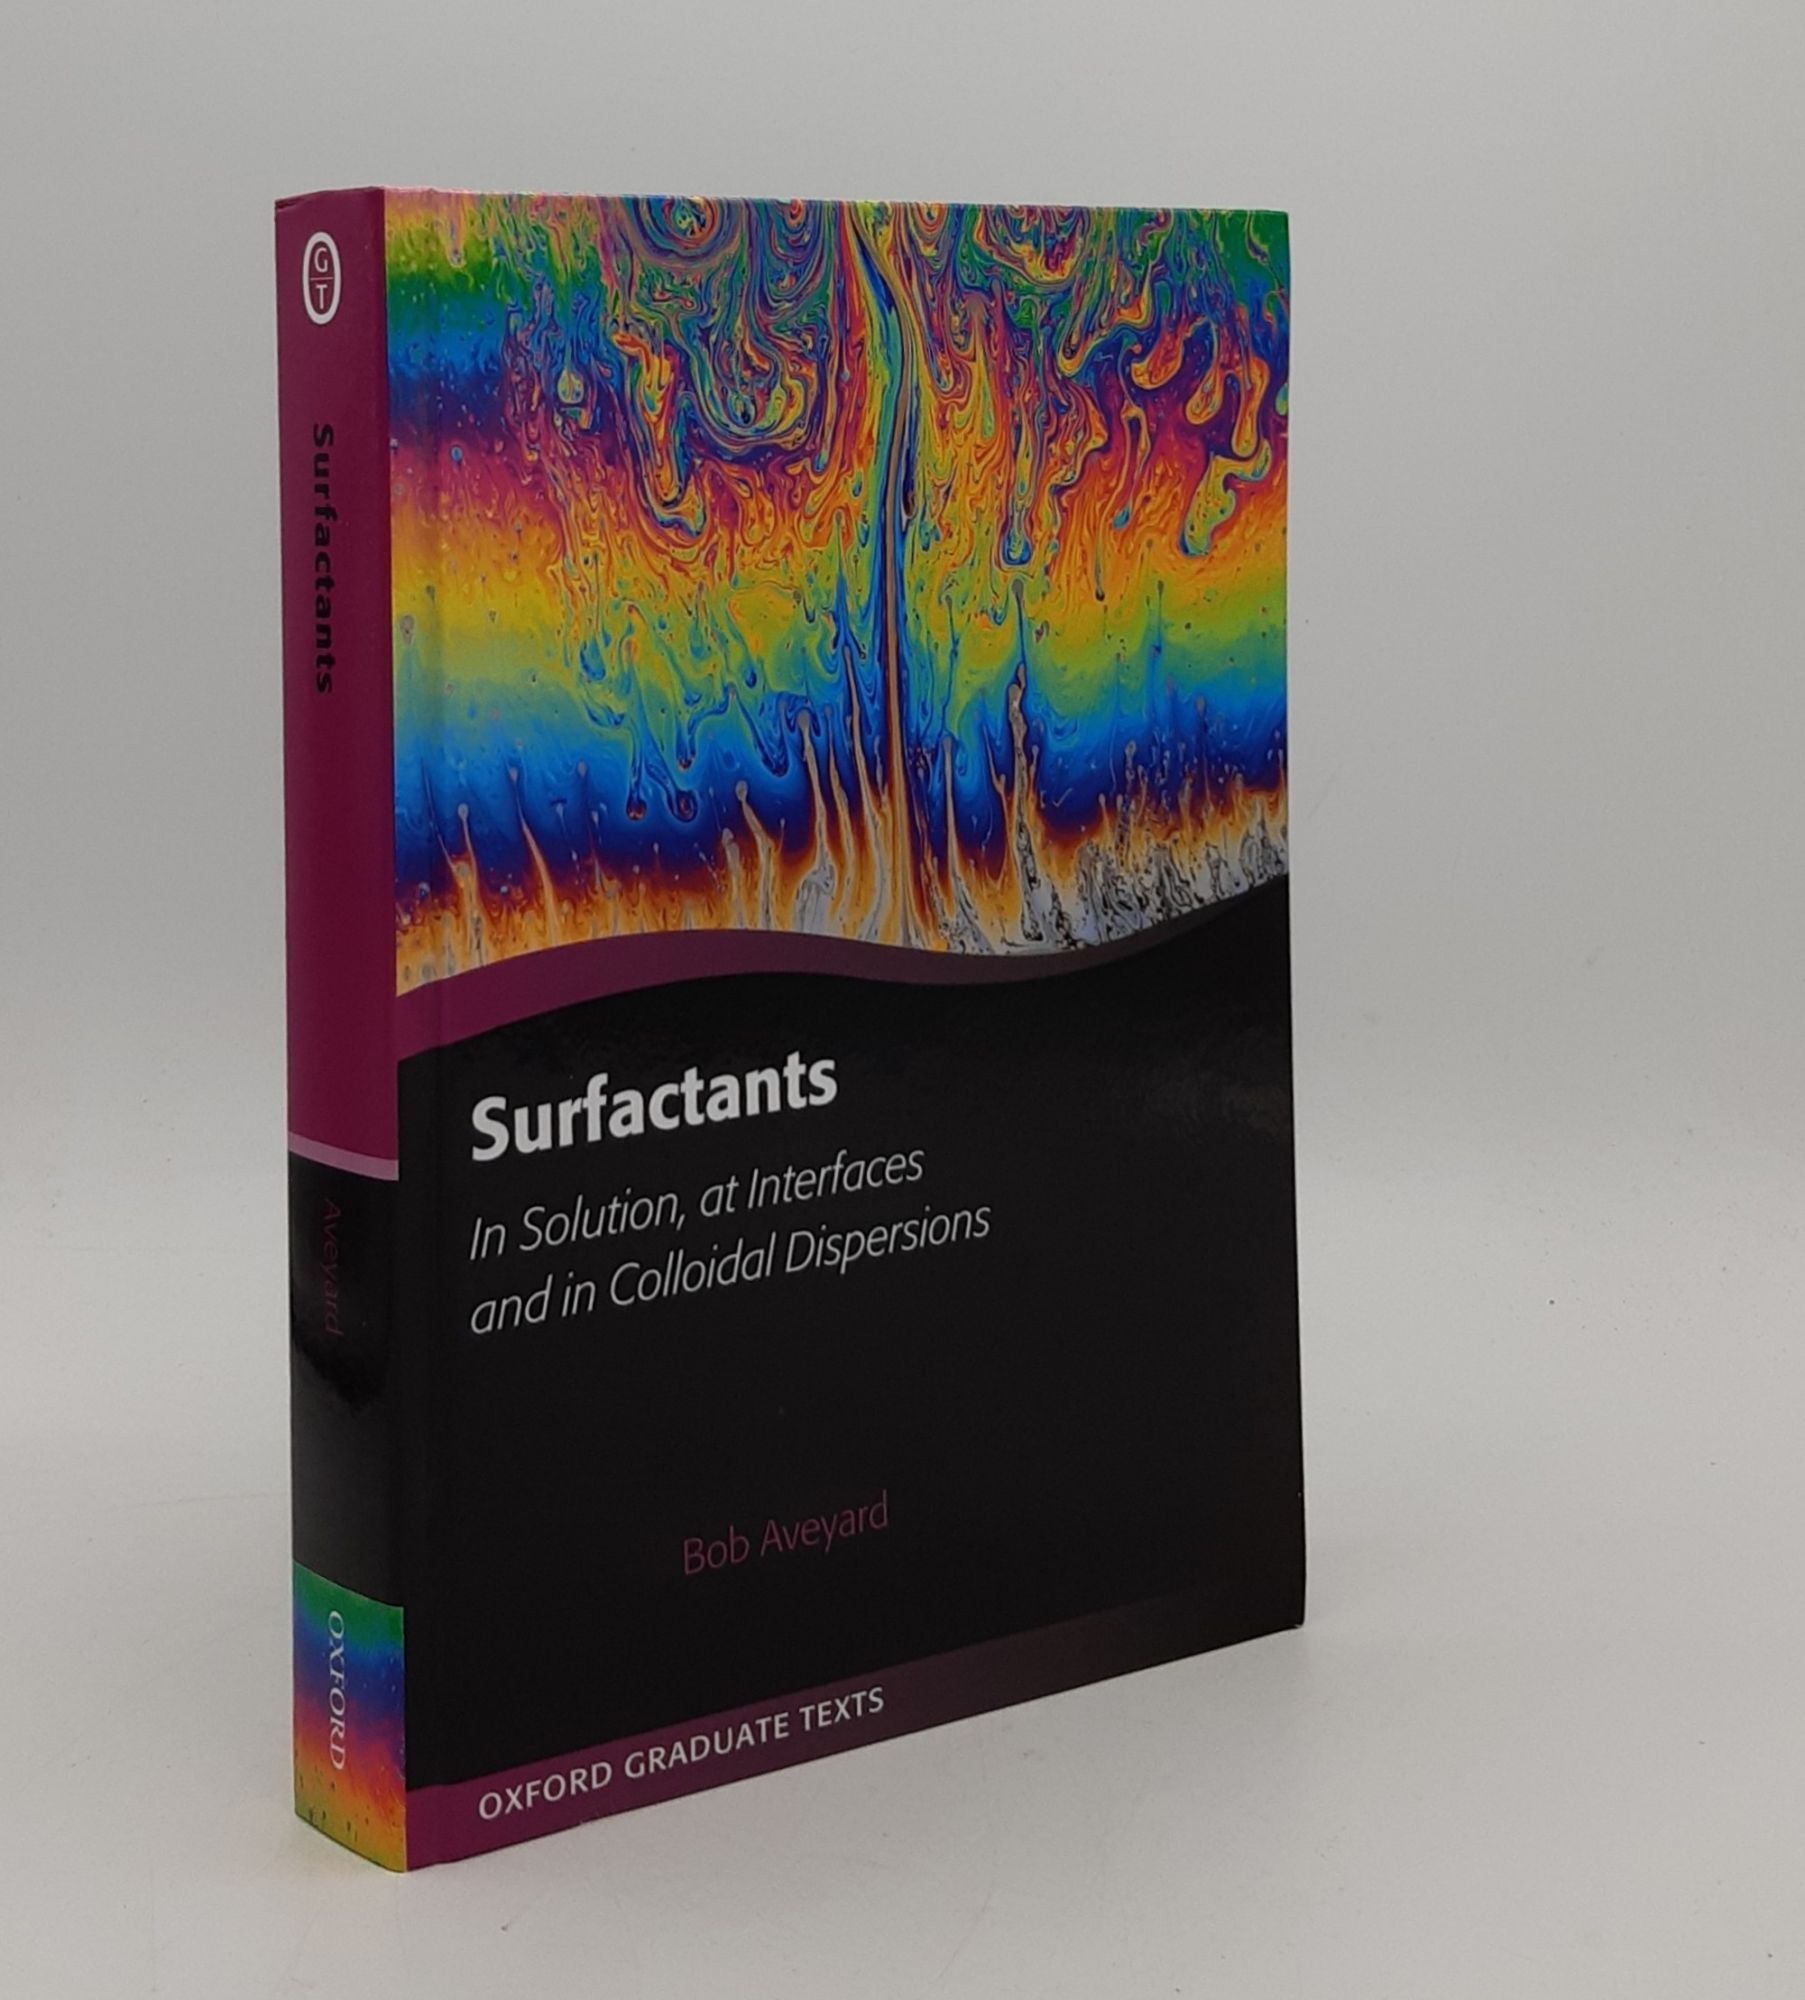 AVEYARD Bob - Surfactants in Solution at Interfaces and in Colloidal Dispersions